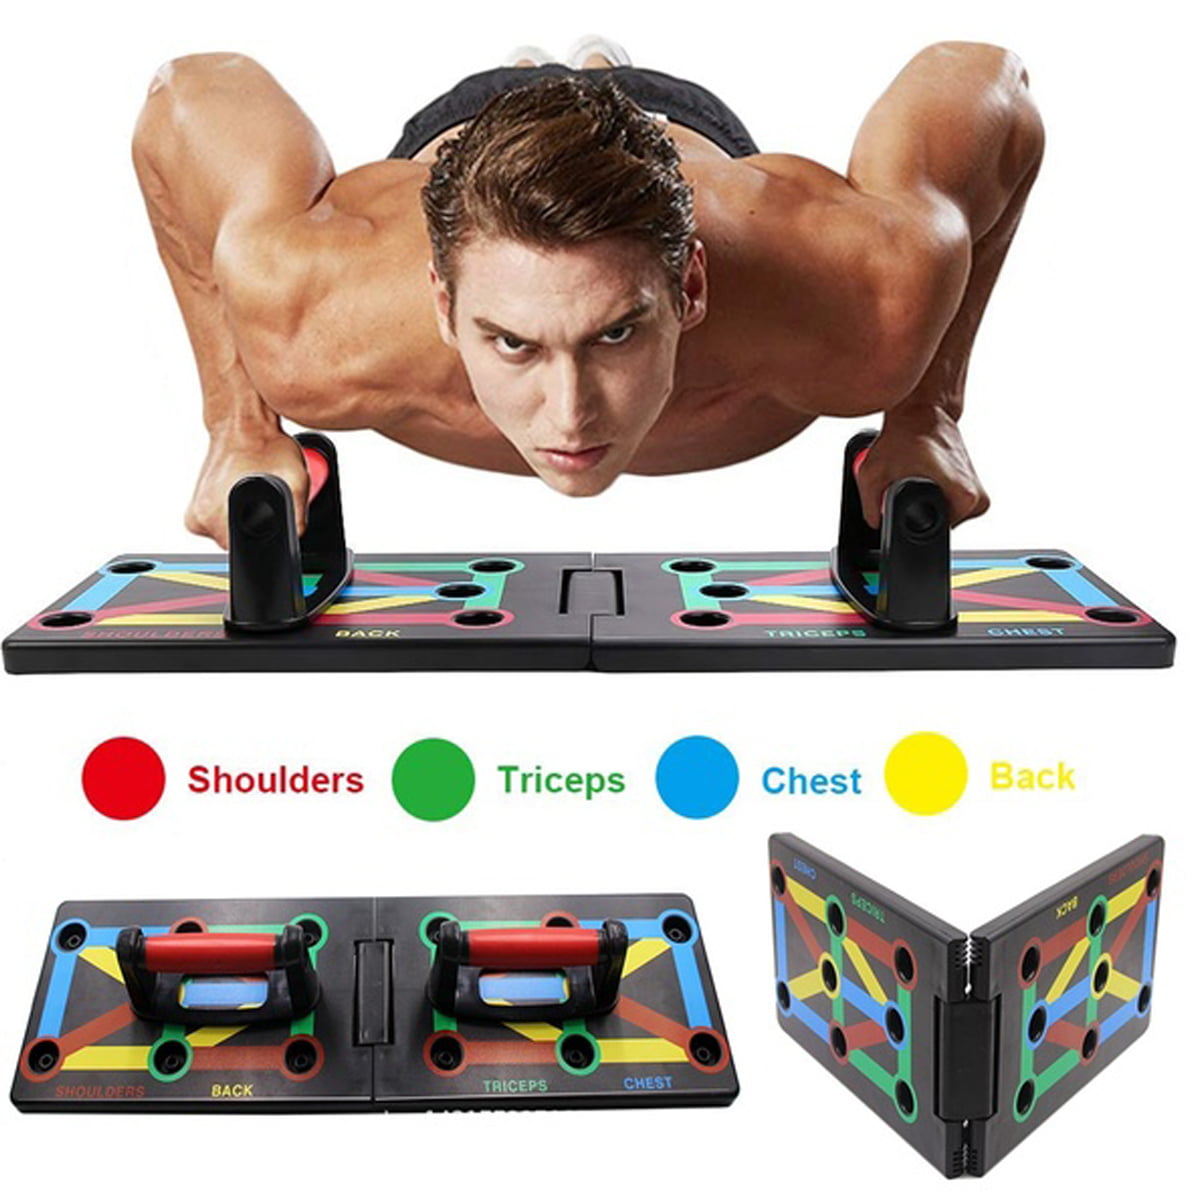 9 in 1 Push Up Rack Board System Fitness Workout Training Gym Exercise Bands 